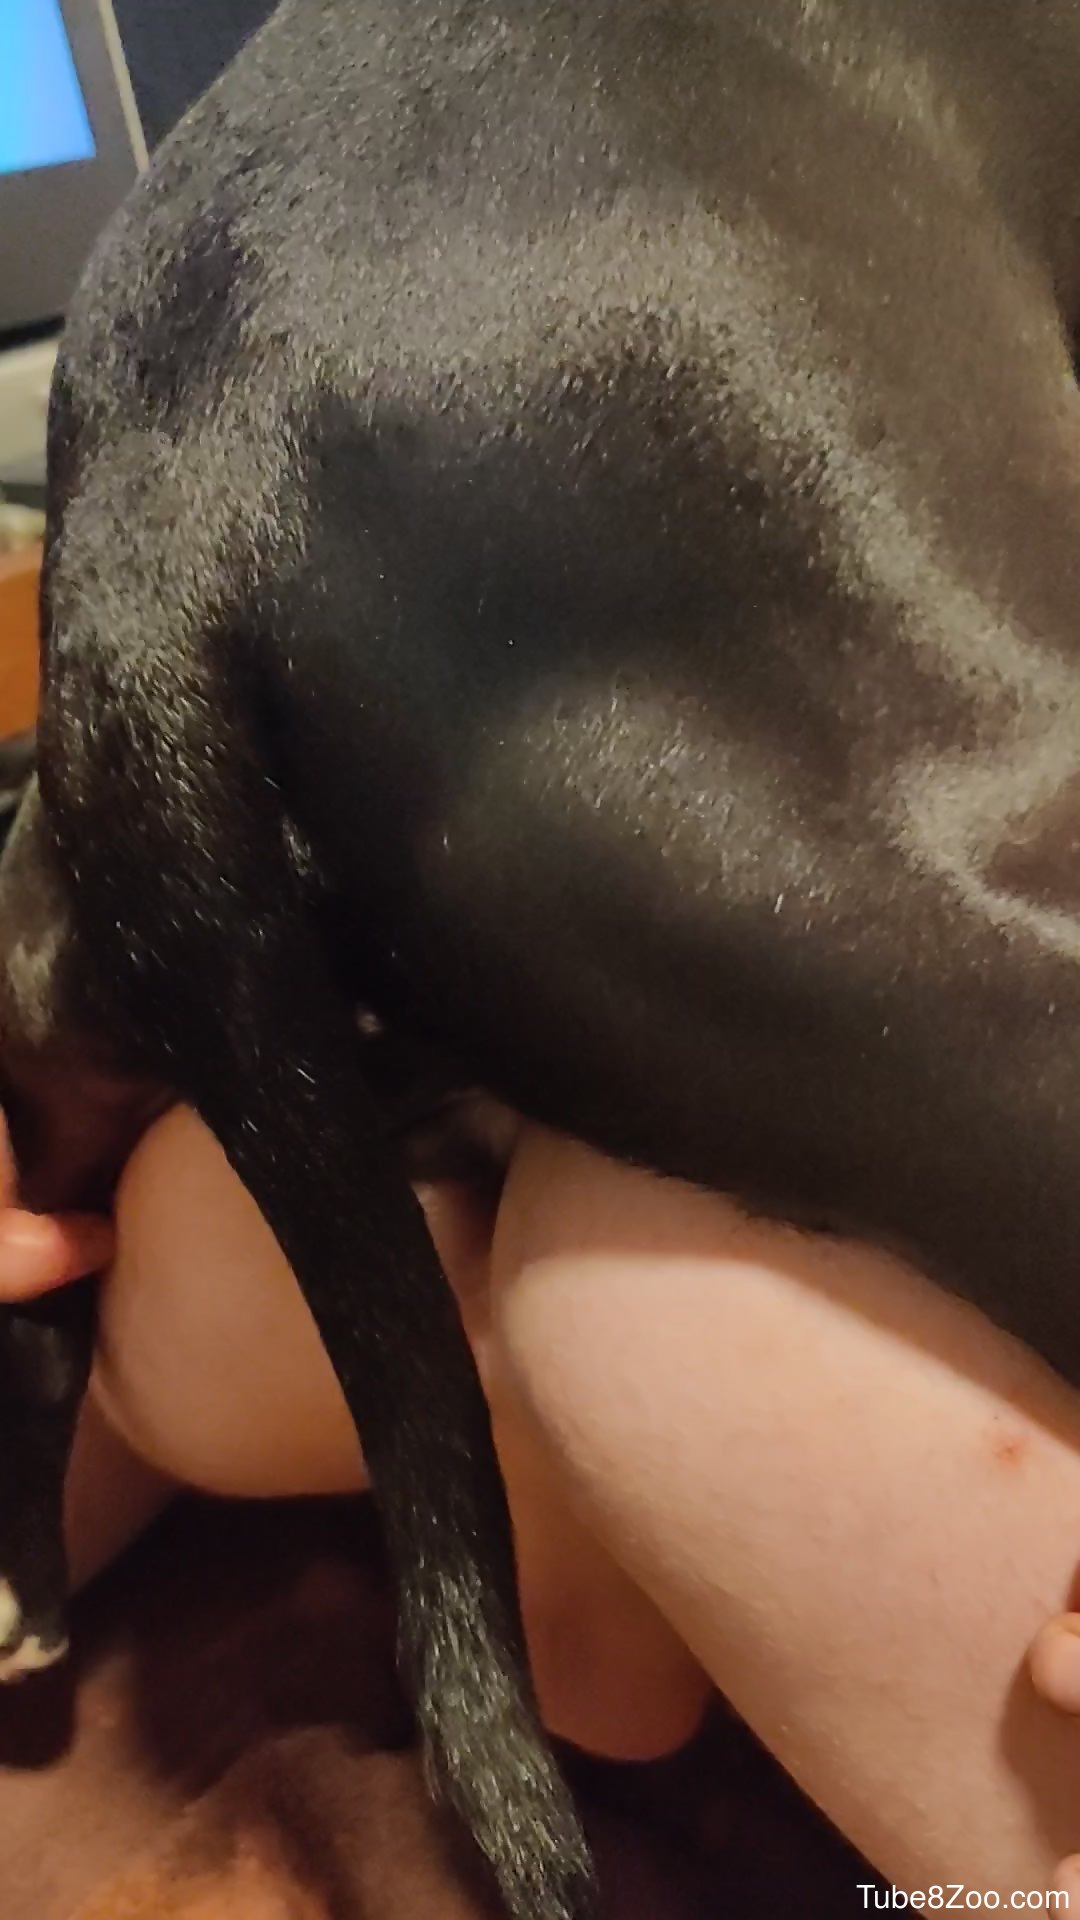 Gay man loves good anal sex with the dog in superb cam scenes